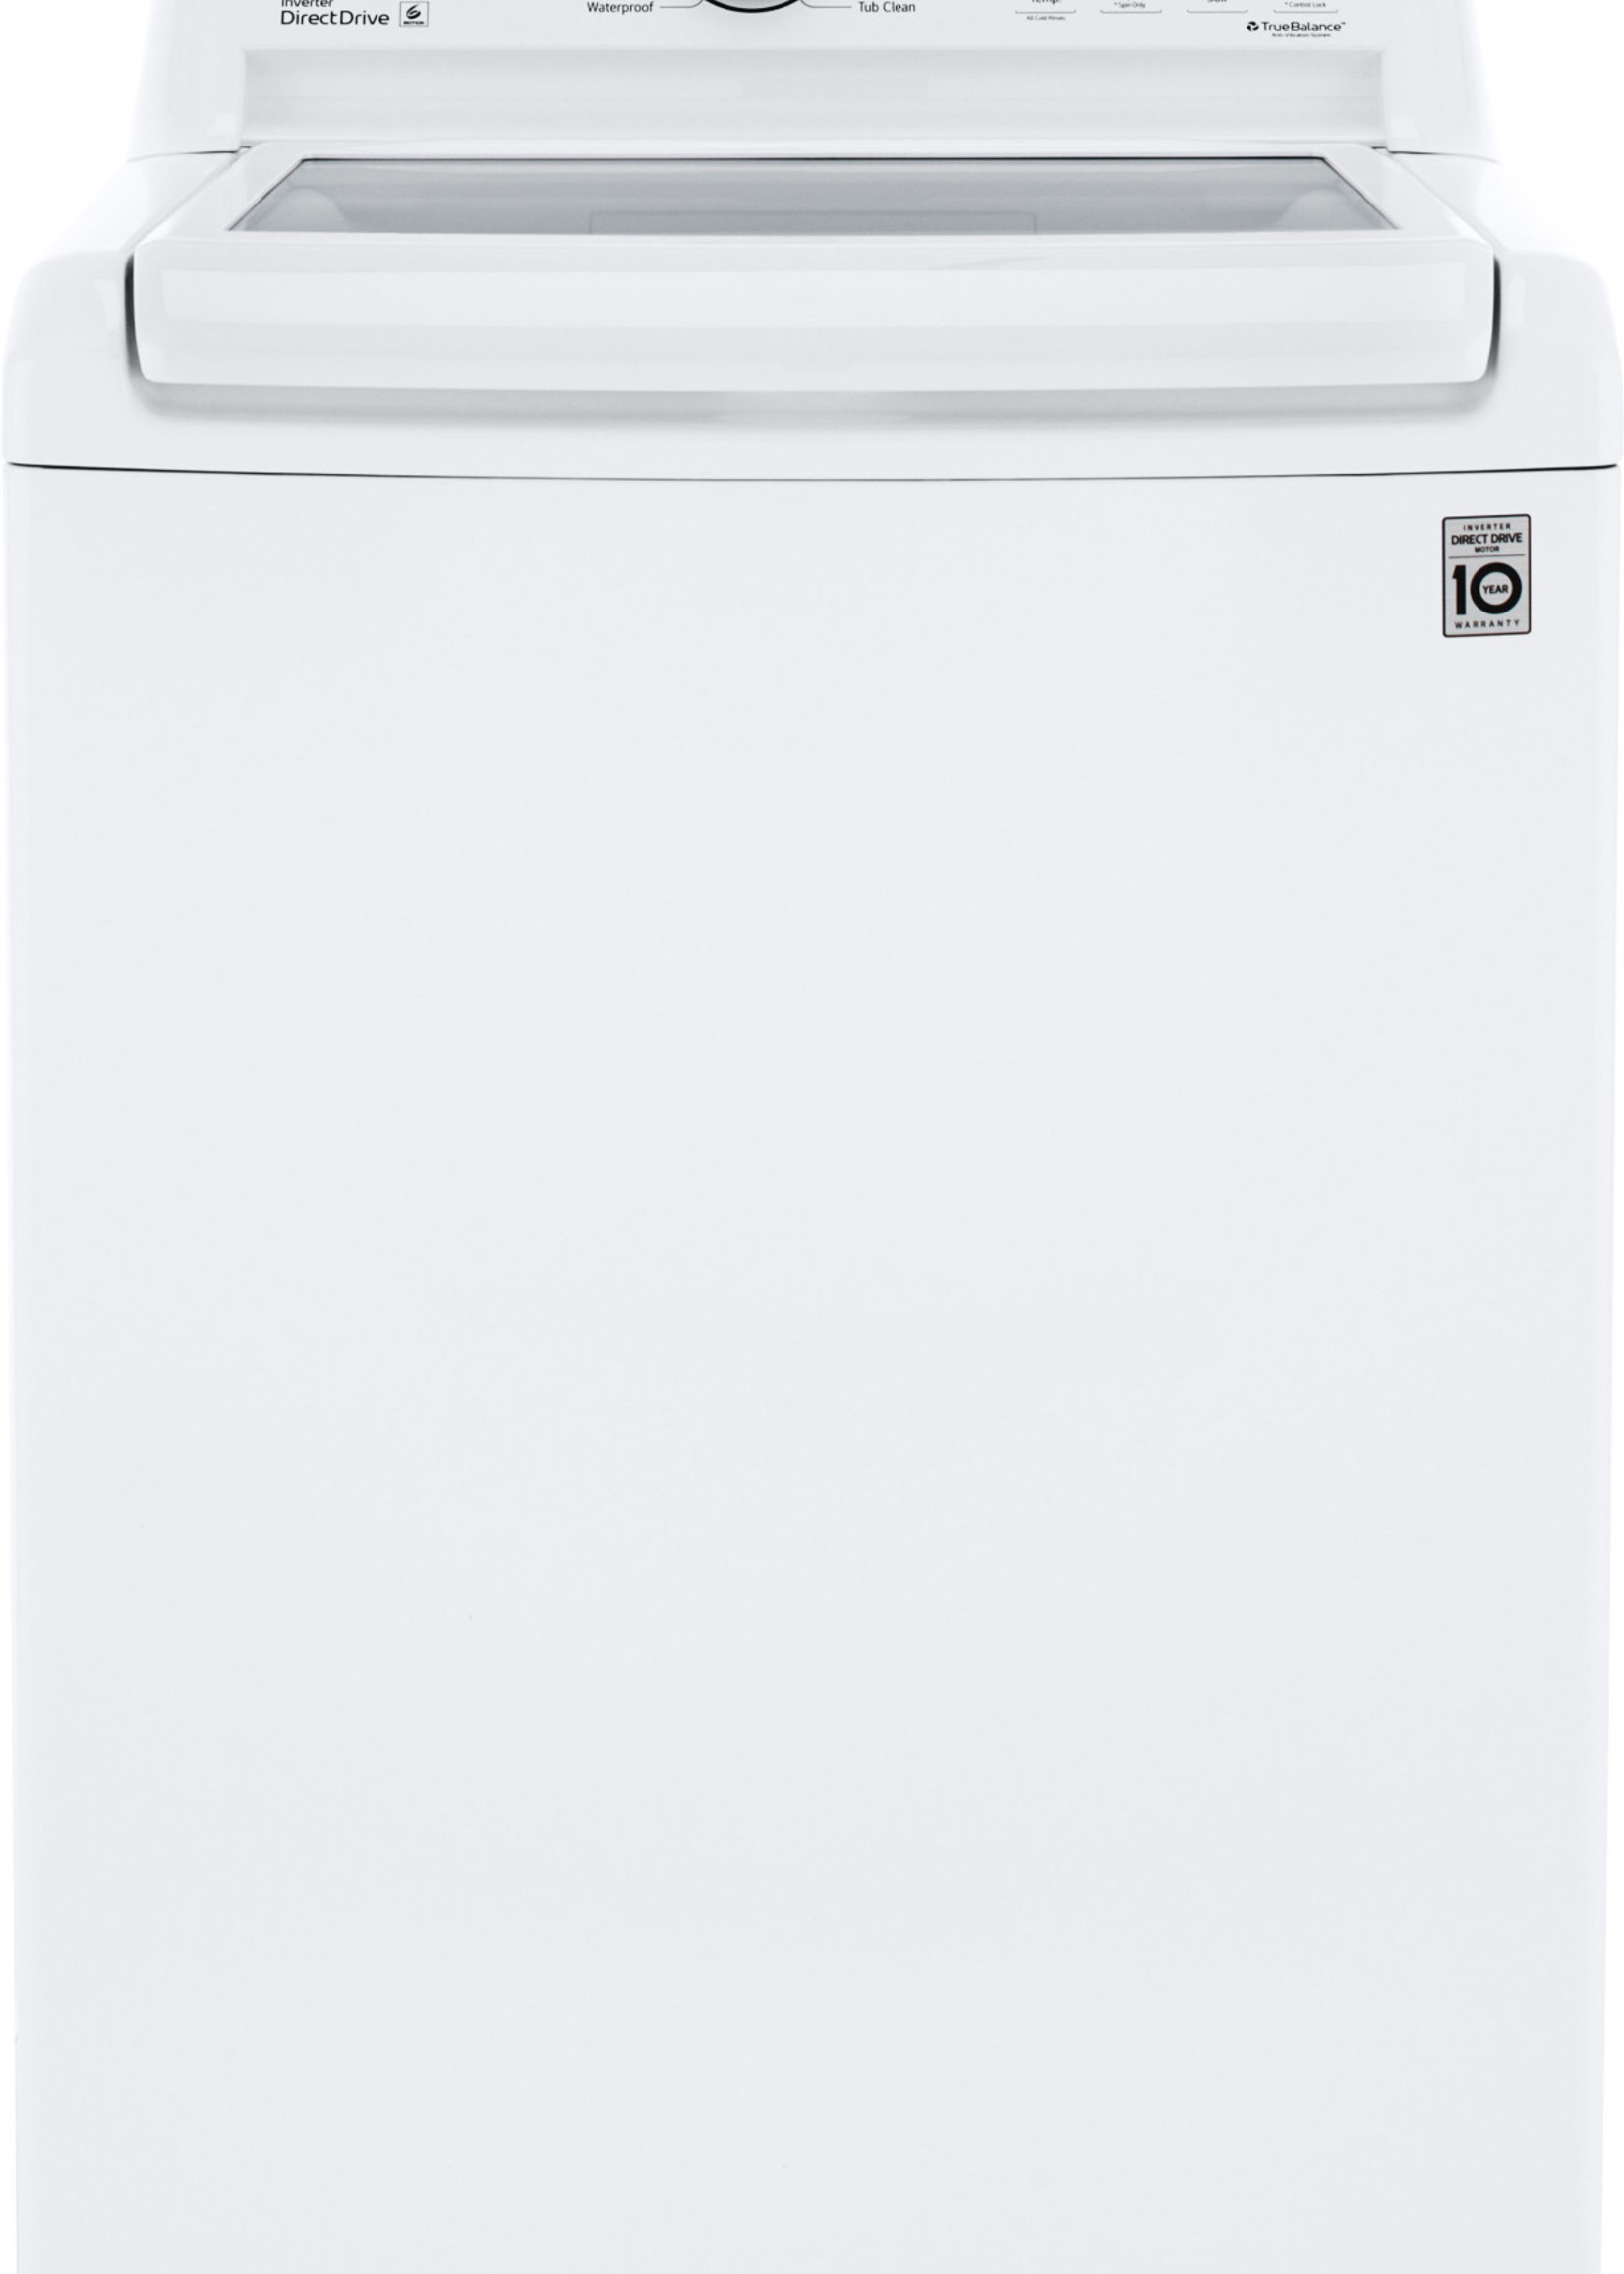 *LG WT7000CW 4.5 Cu. Ft. Smart Top Load Washer with Vibration Reduction and TurboDrum Technolog